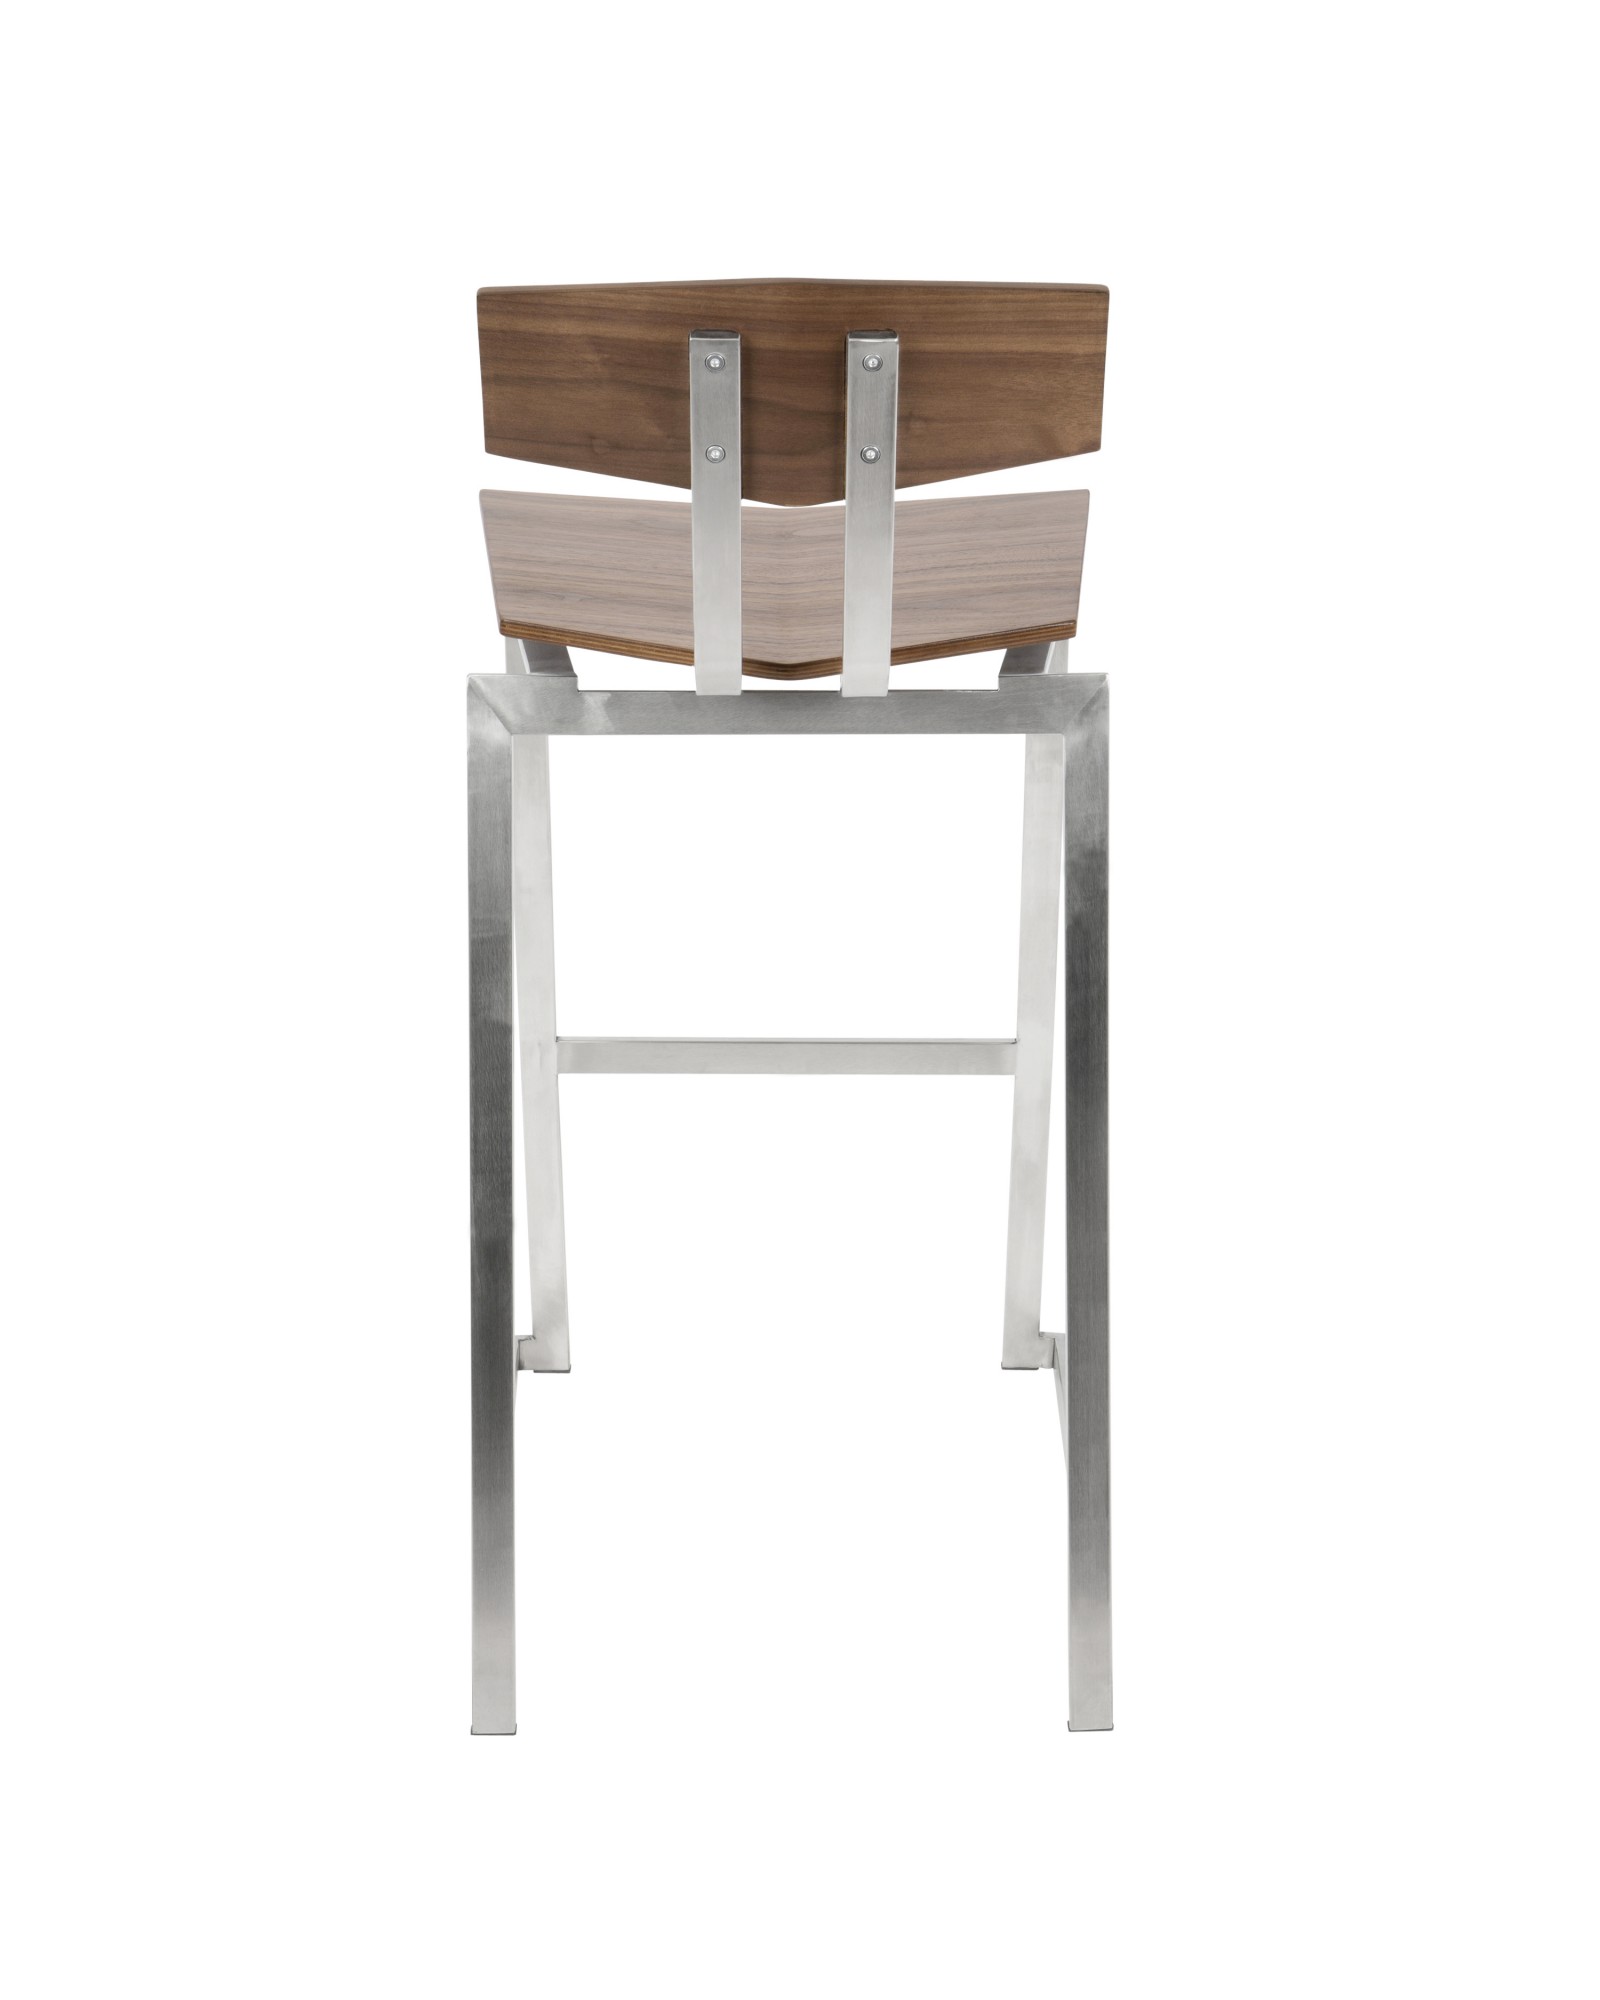 Flight Contemporary Stainless Steel Barstool in Walnut Wood - Set of 2